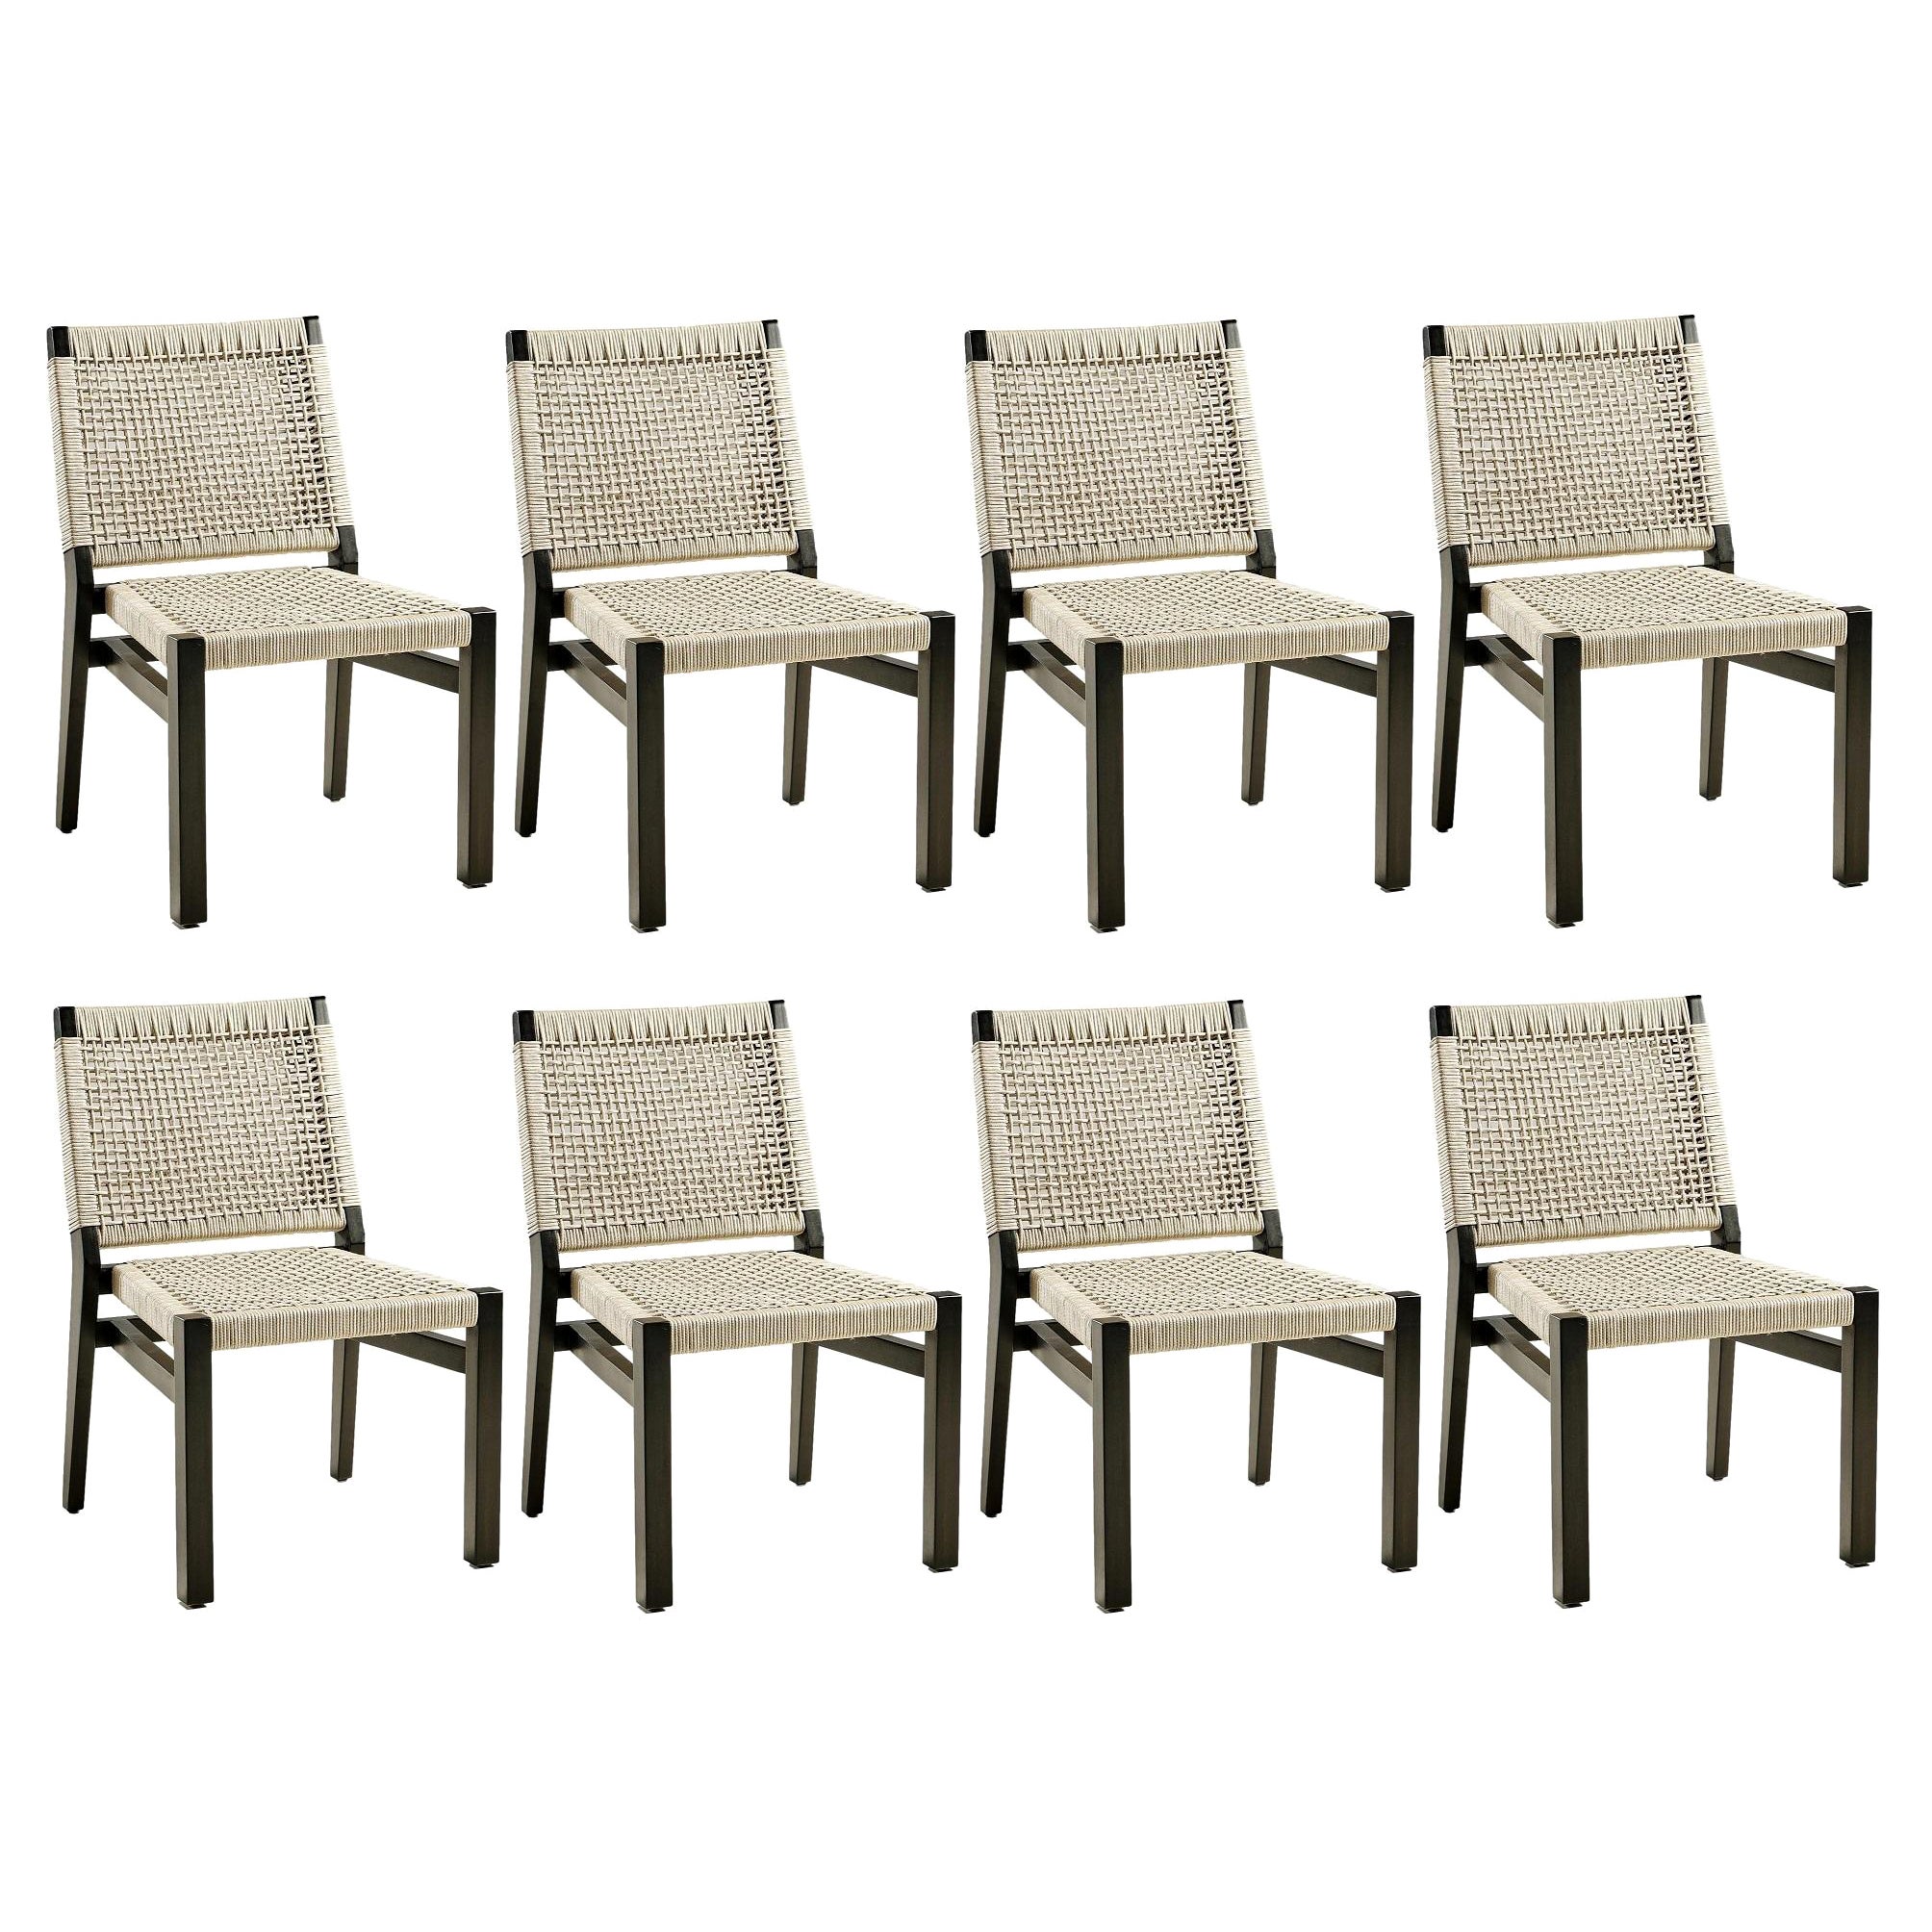 Stackable Outdoor Dining Chairs, Acacia Wood/Rope For Sale